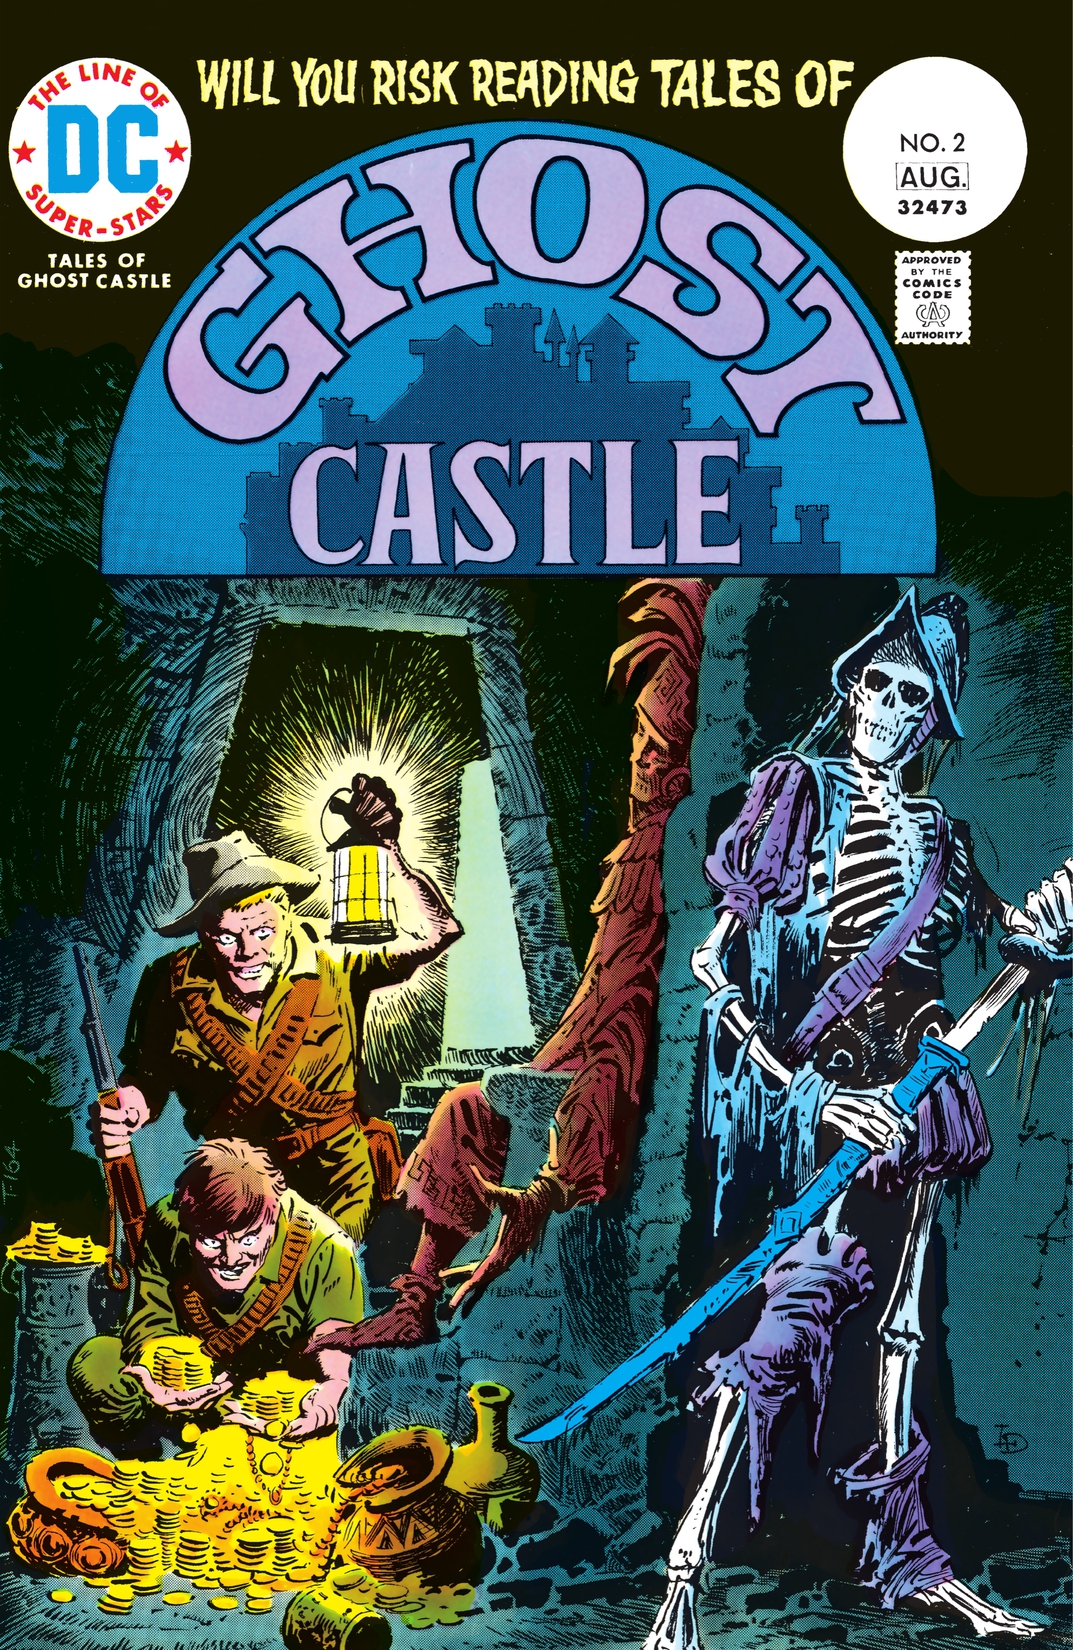 Tales of Ghost Castle #2 preview images